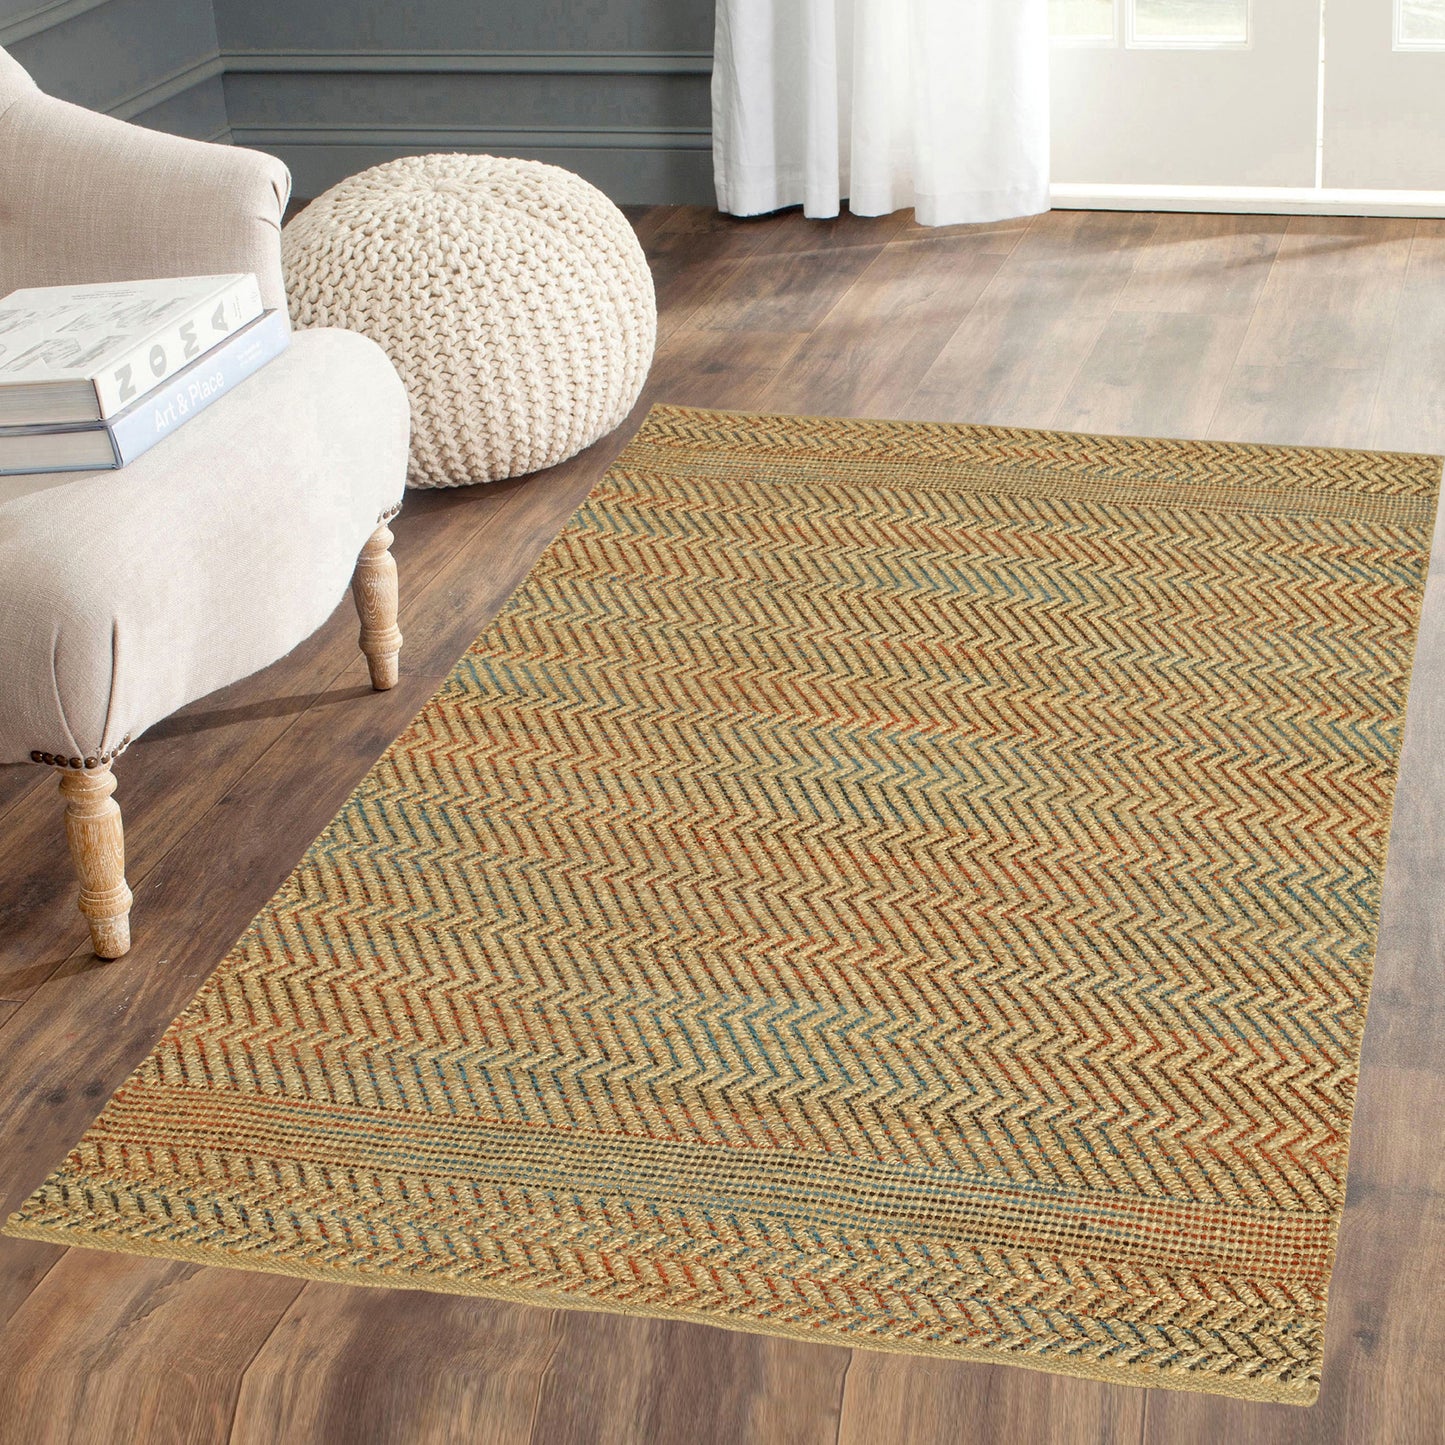 Shay 9423-899 Natural/Multi Area Rug